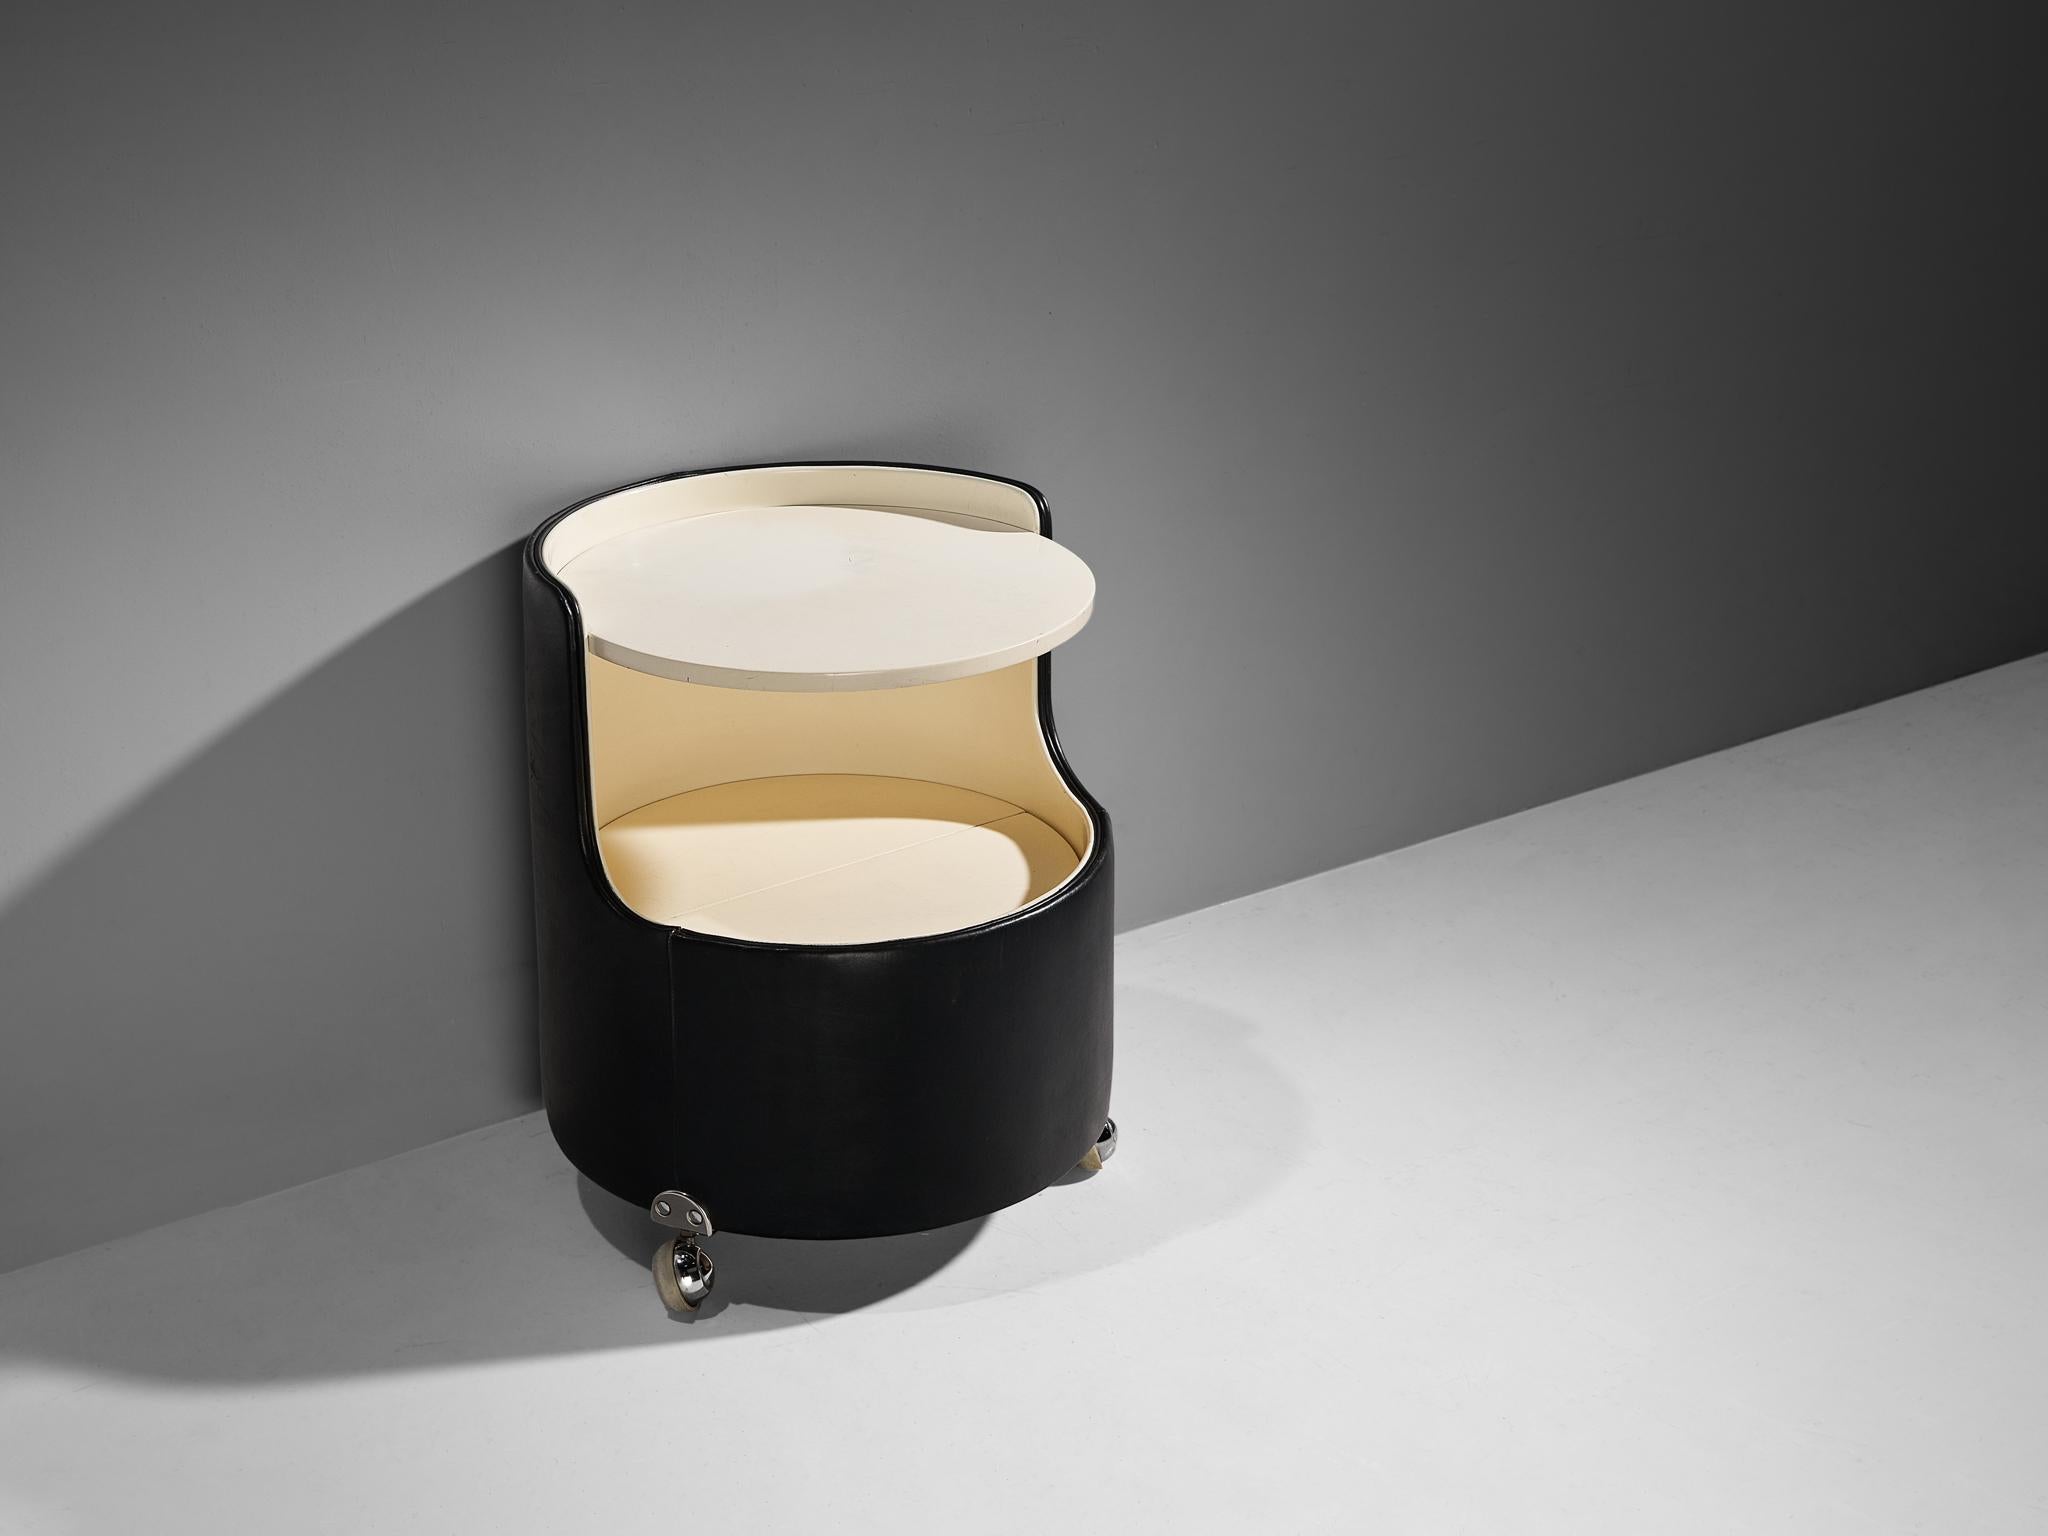 Luigi Massoni for Poltrona Frau, nightstand, leather, lacquered wood, metal, Italy, 1960s

Charming round movable nightstand designed by Luigi Massoni in the 1960s. This particular one has a black leather exterior and the rest of this design is